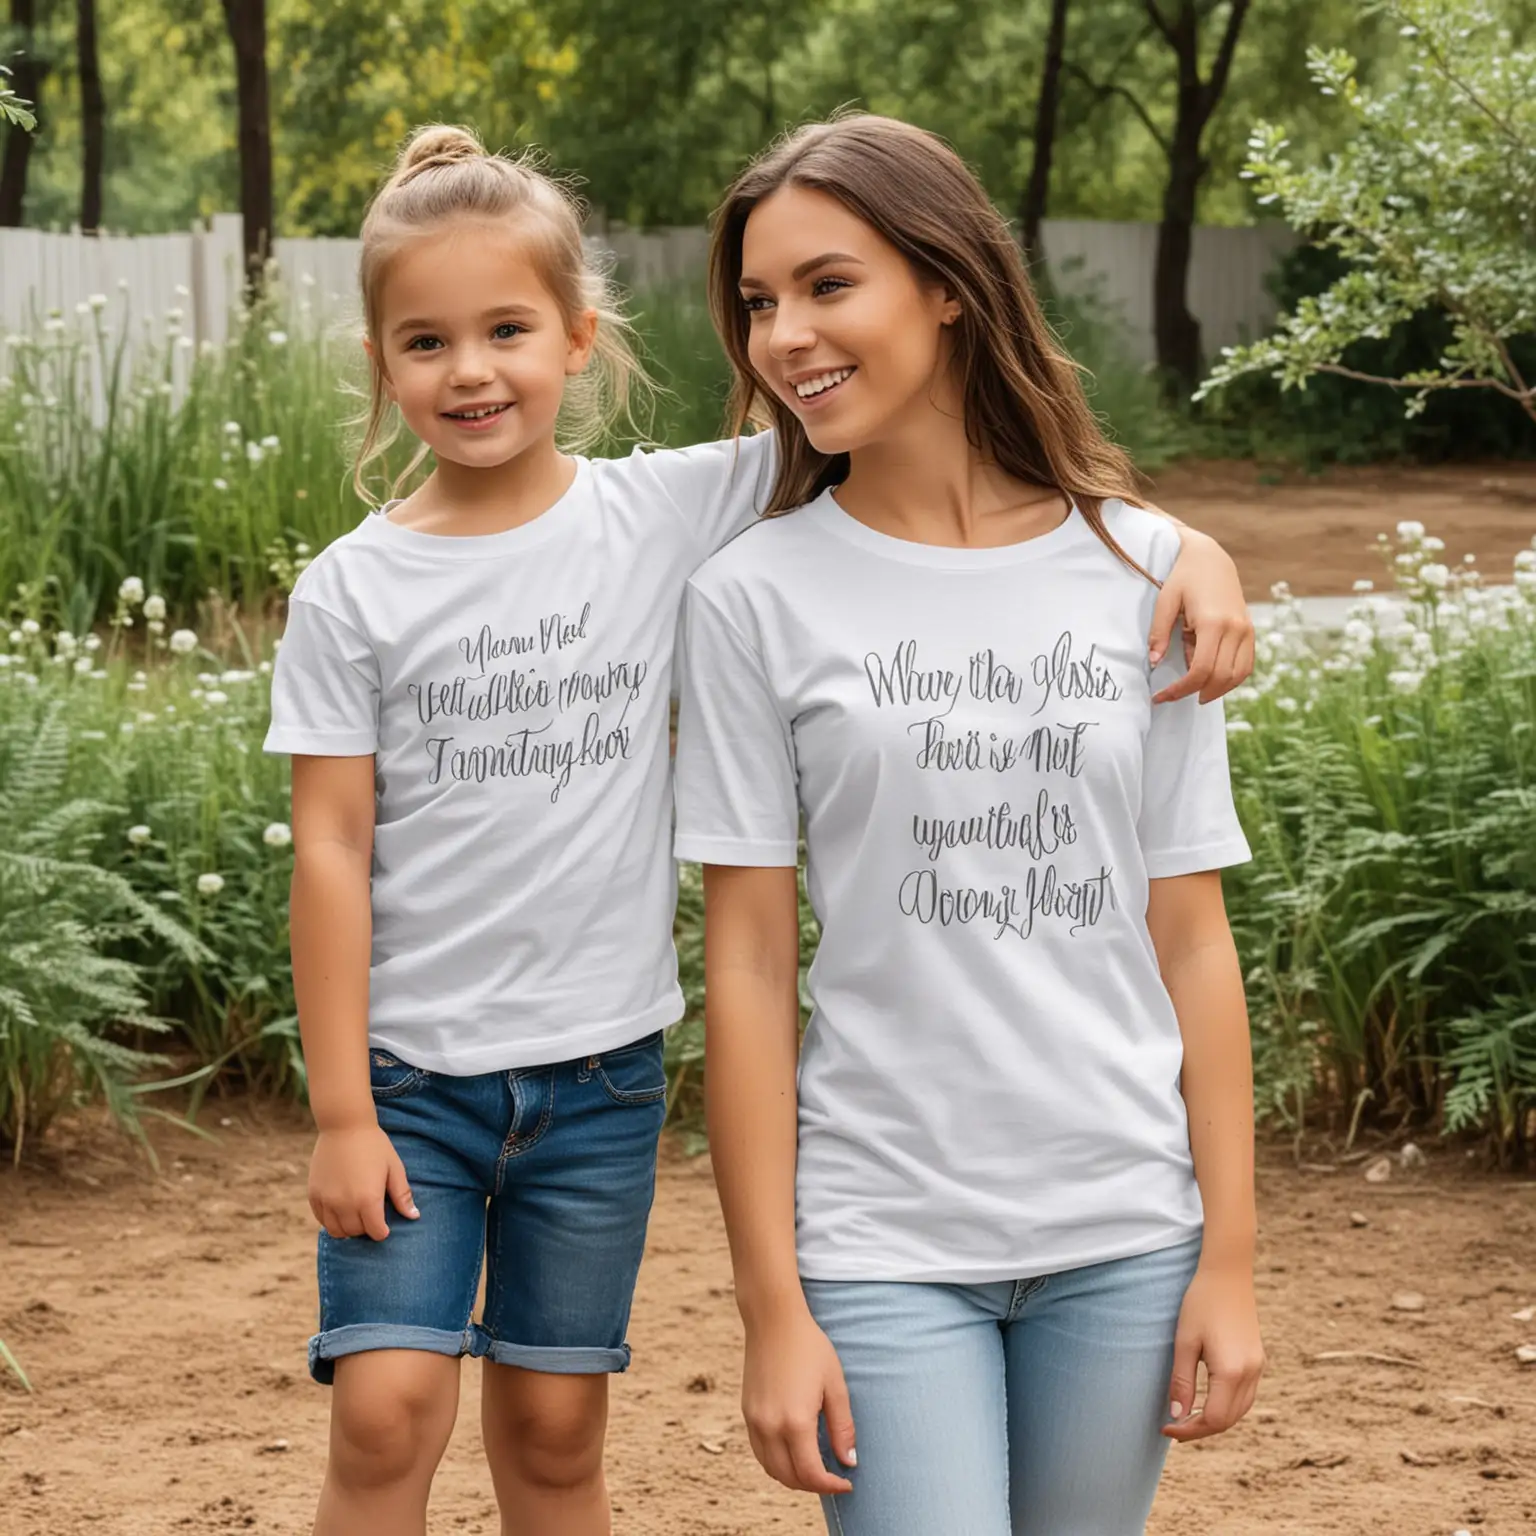 Outdoor Wedding White Tee Mockup with Female Adult and Toddler Girl Models